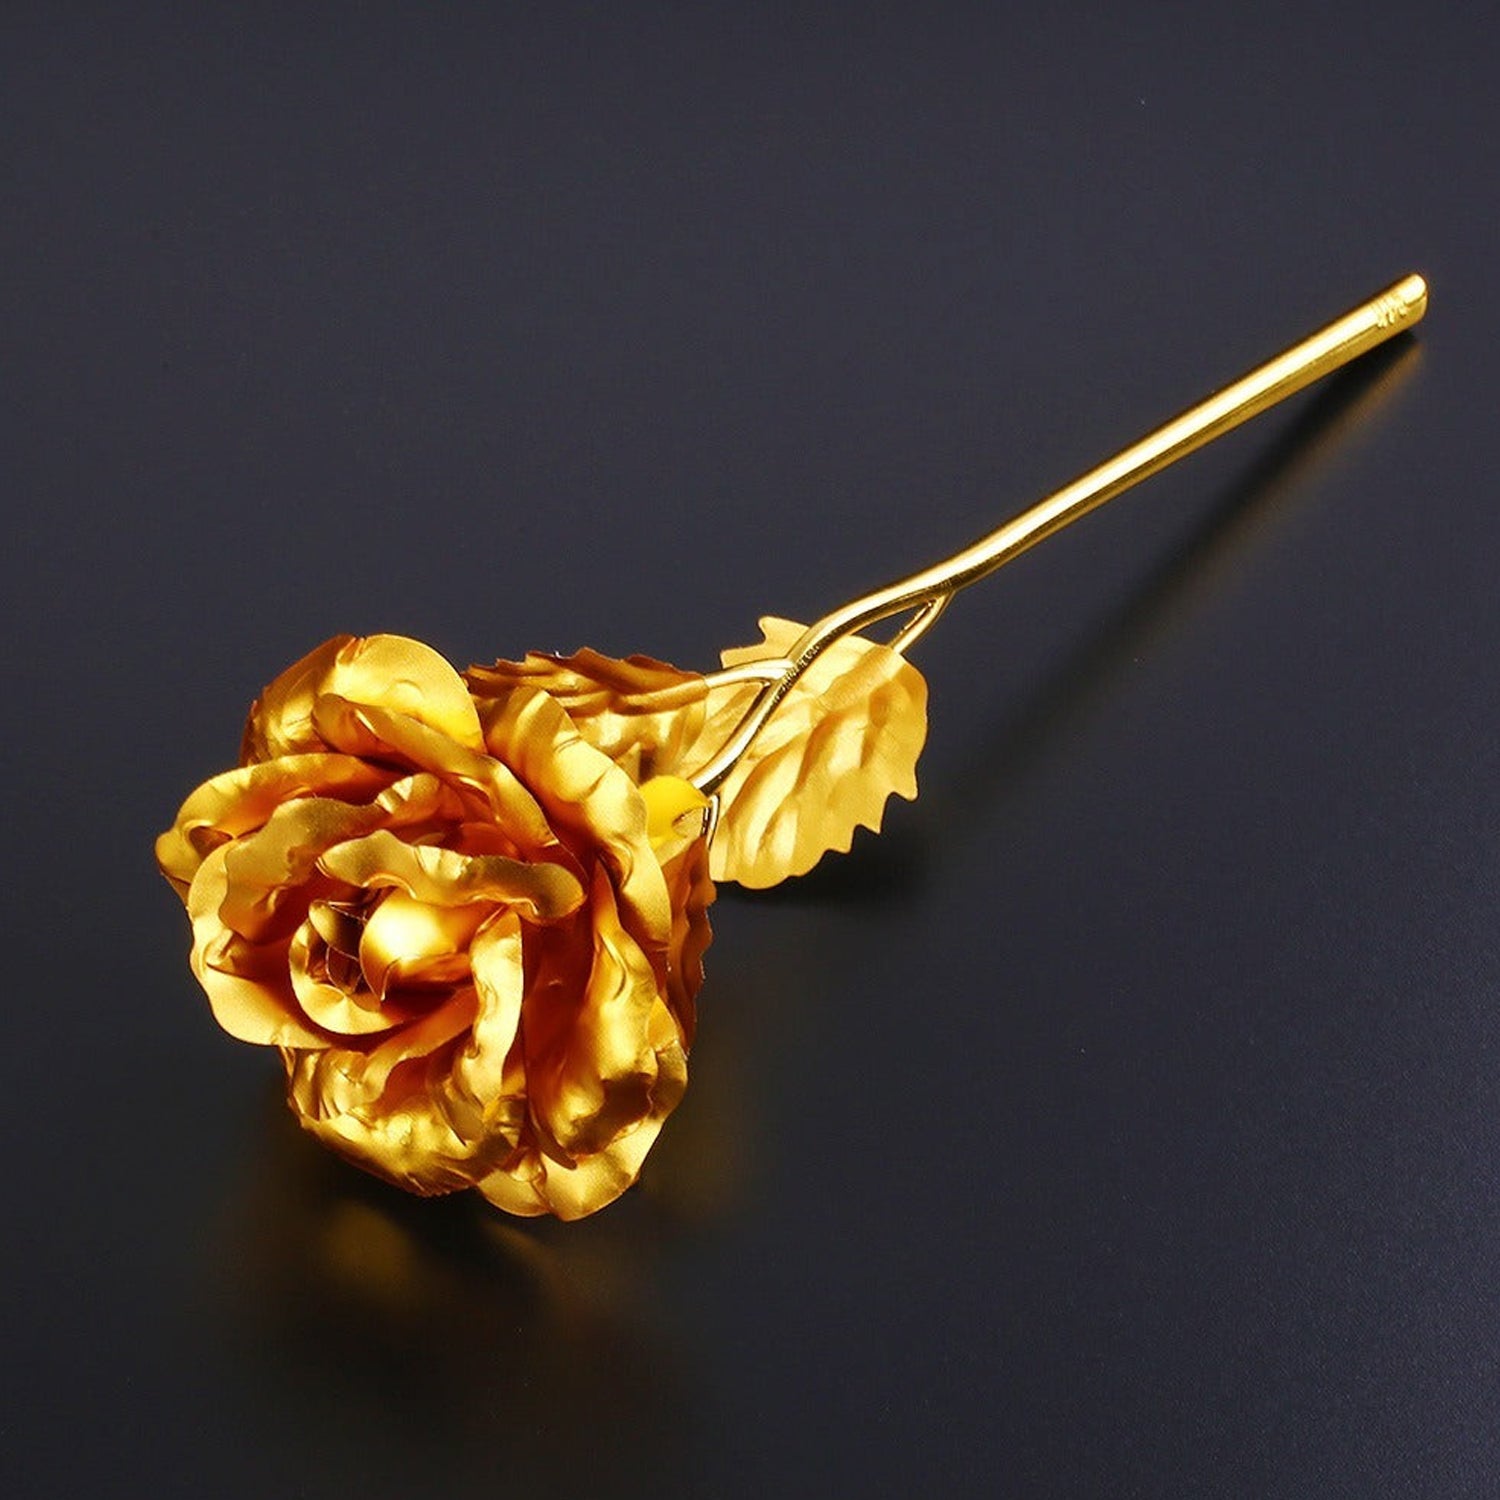 0879 B Golden Rose used in all kinds of places like household, offices, cafe's, etc. for decorating and to look good purposes and all. DeoDap